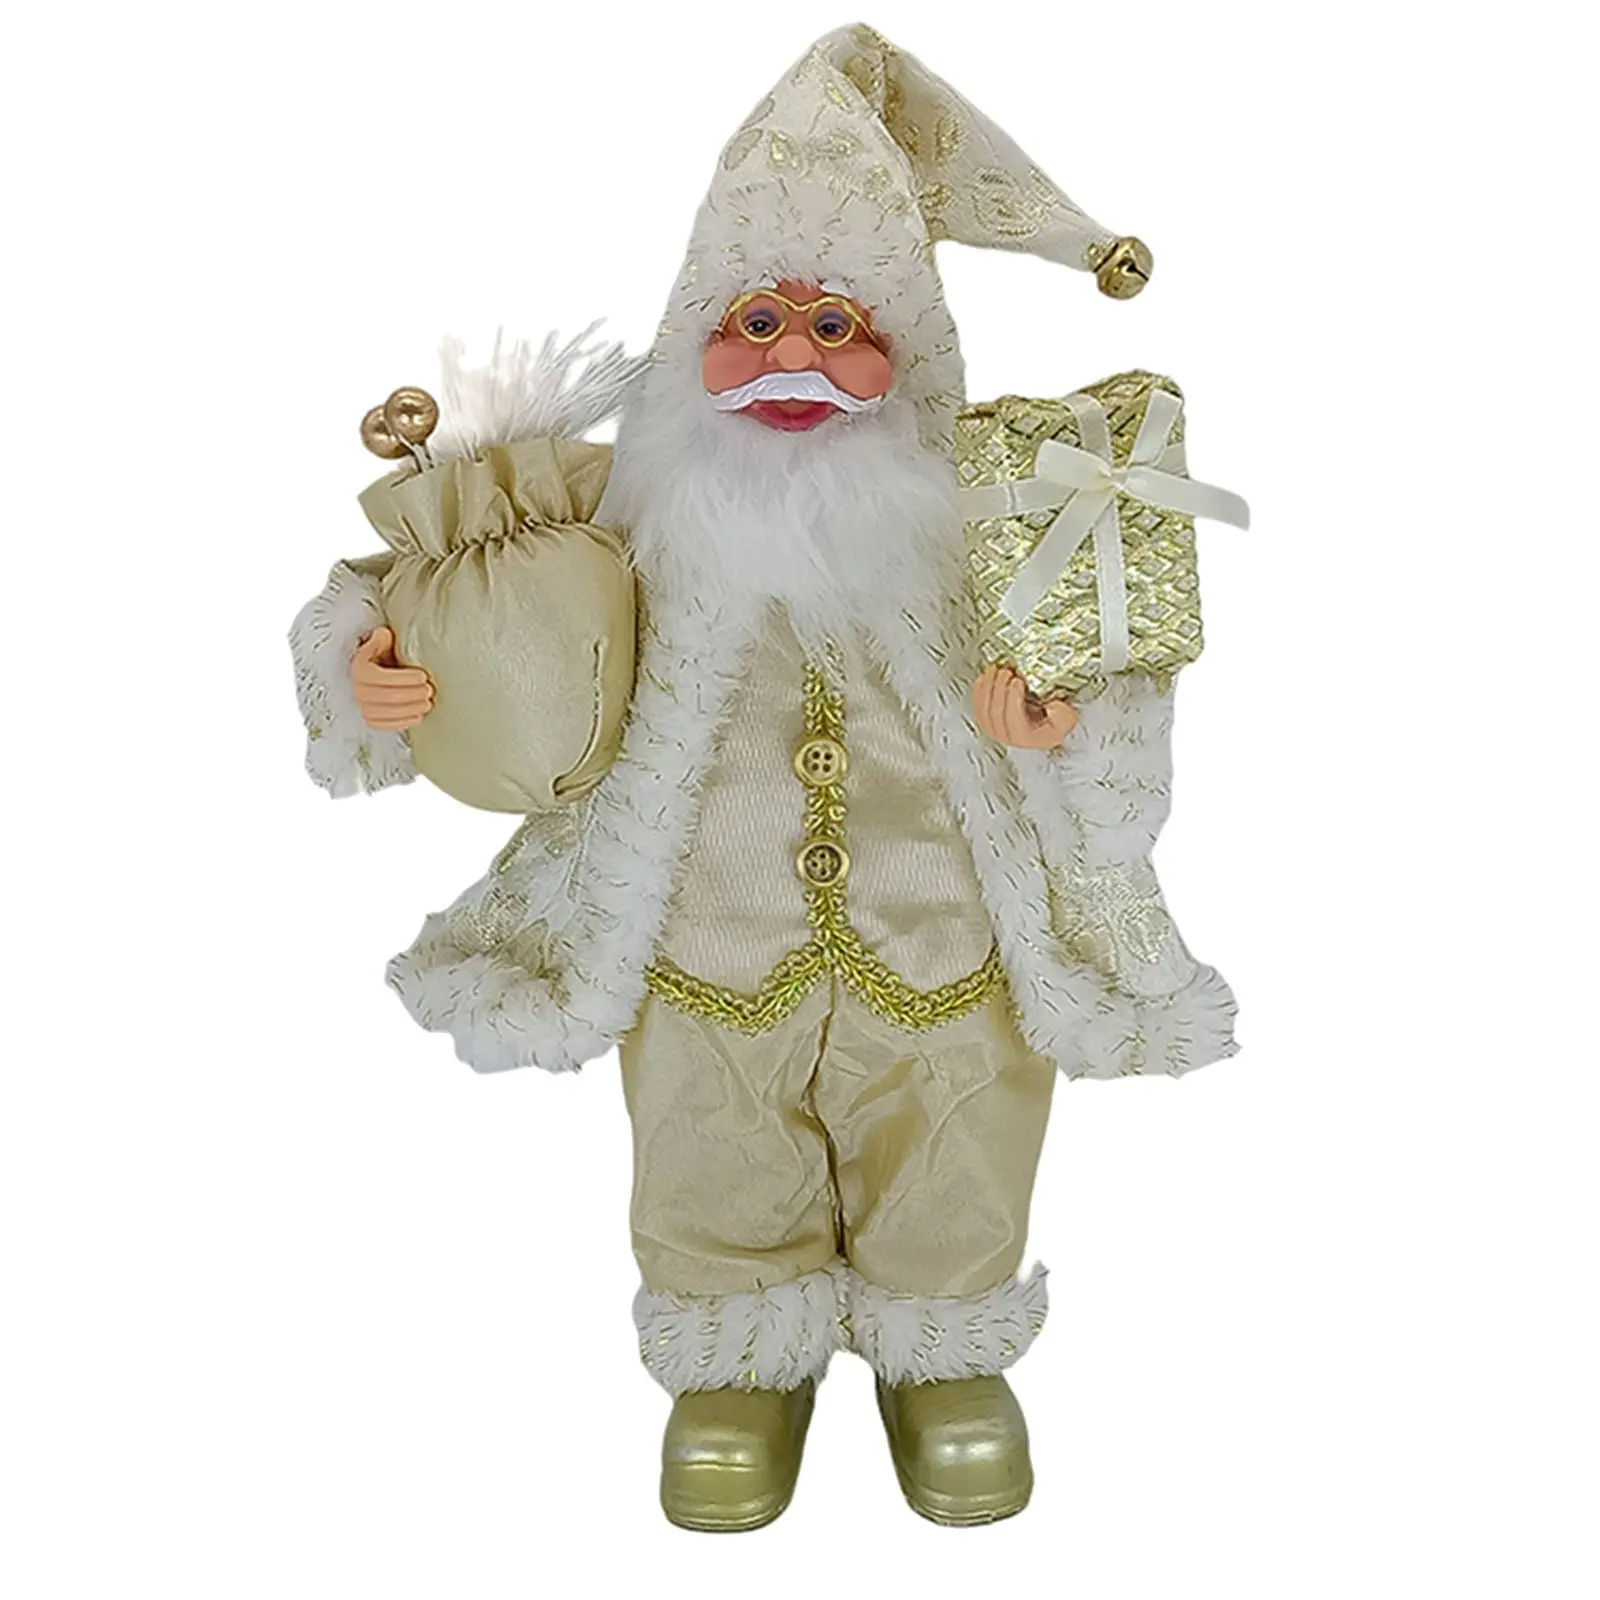 Delux Father Christmas Santa Claus Doll Statue Standing Figure Xmas Tabletop Desk Decoration Home Indoor Cabinet Ornaments